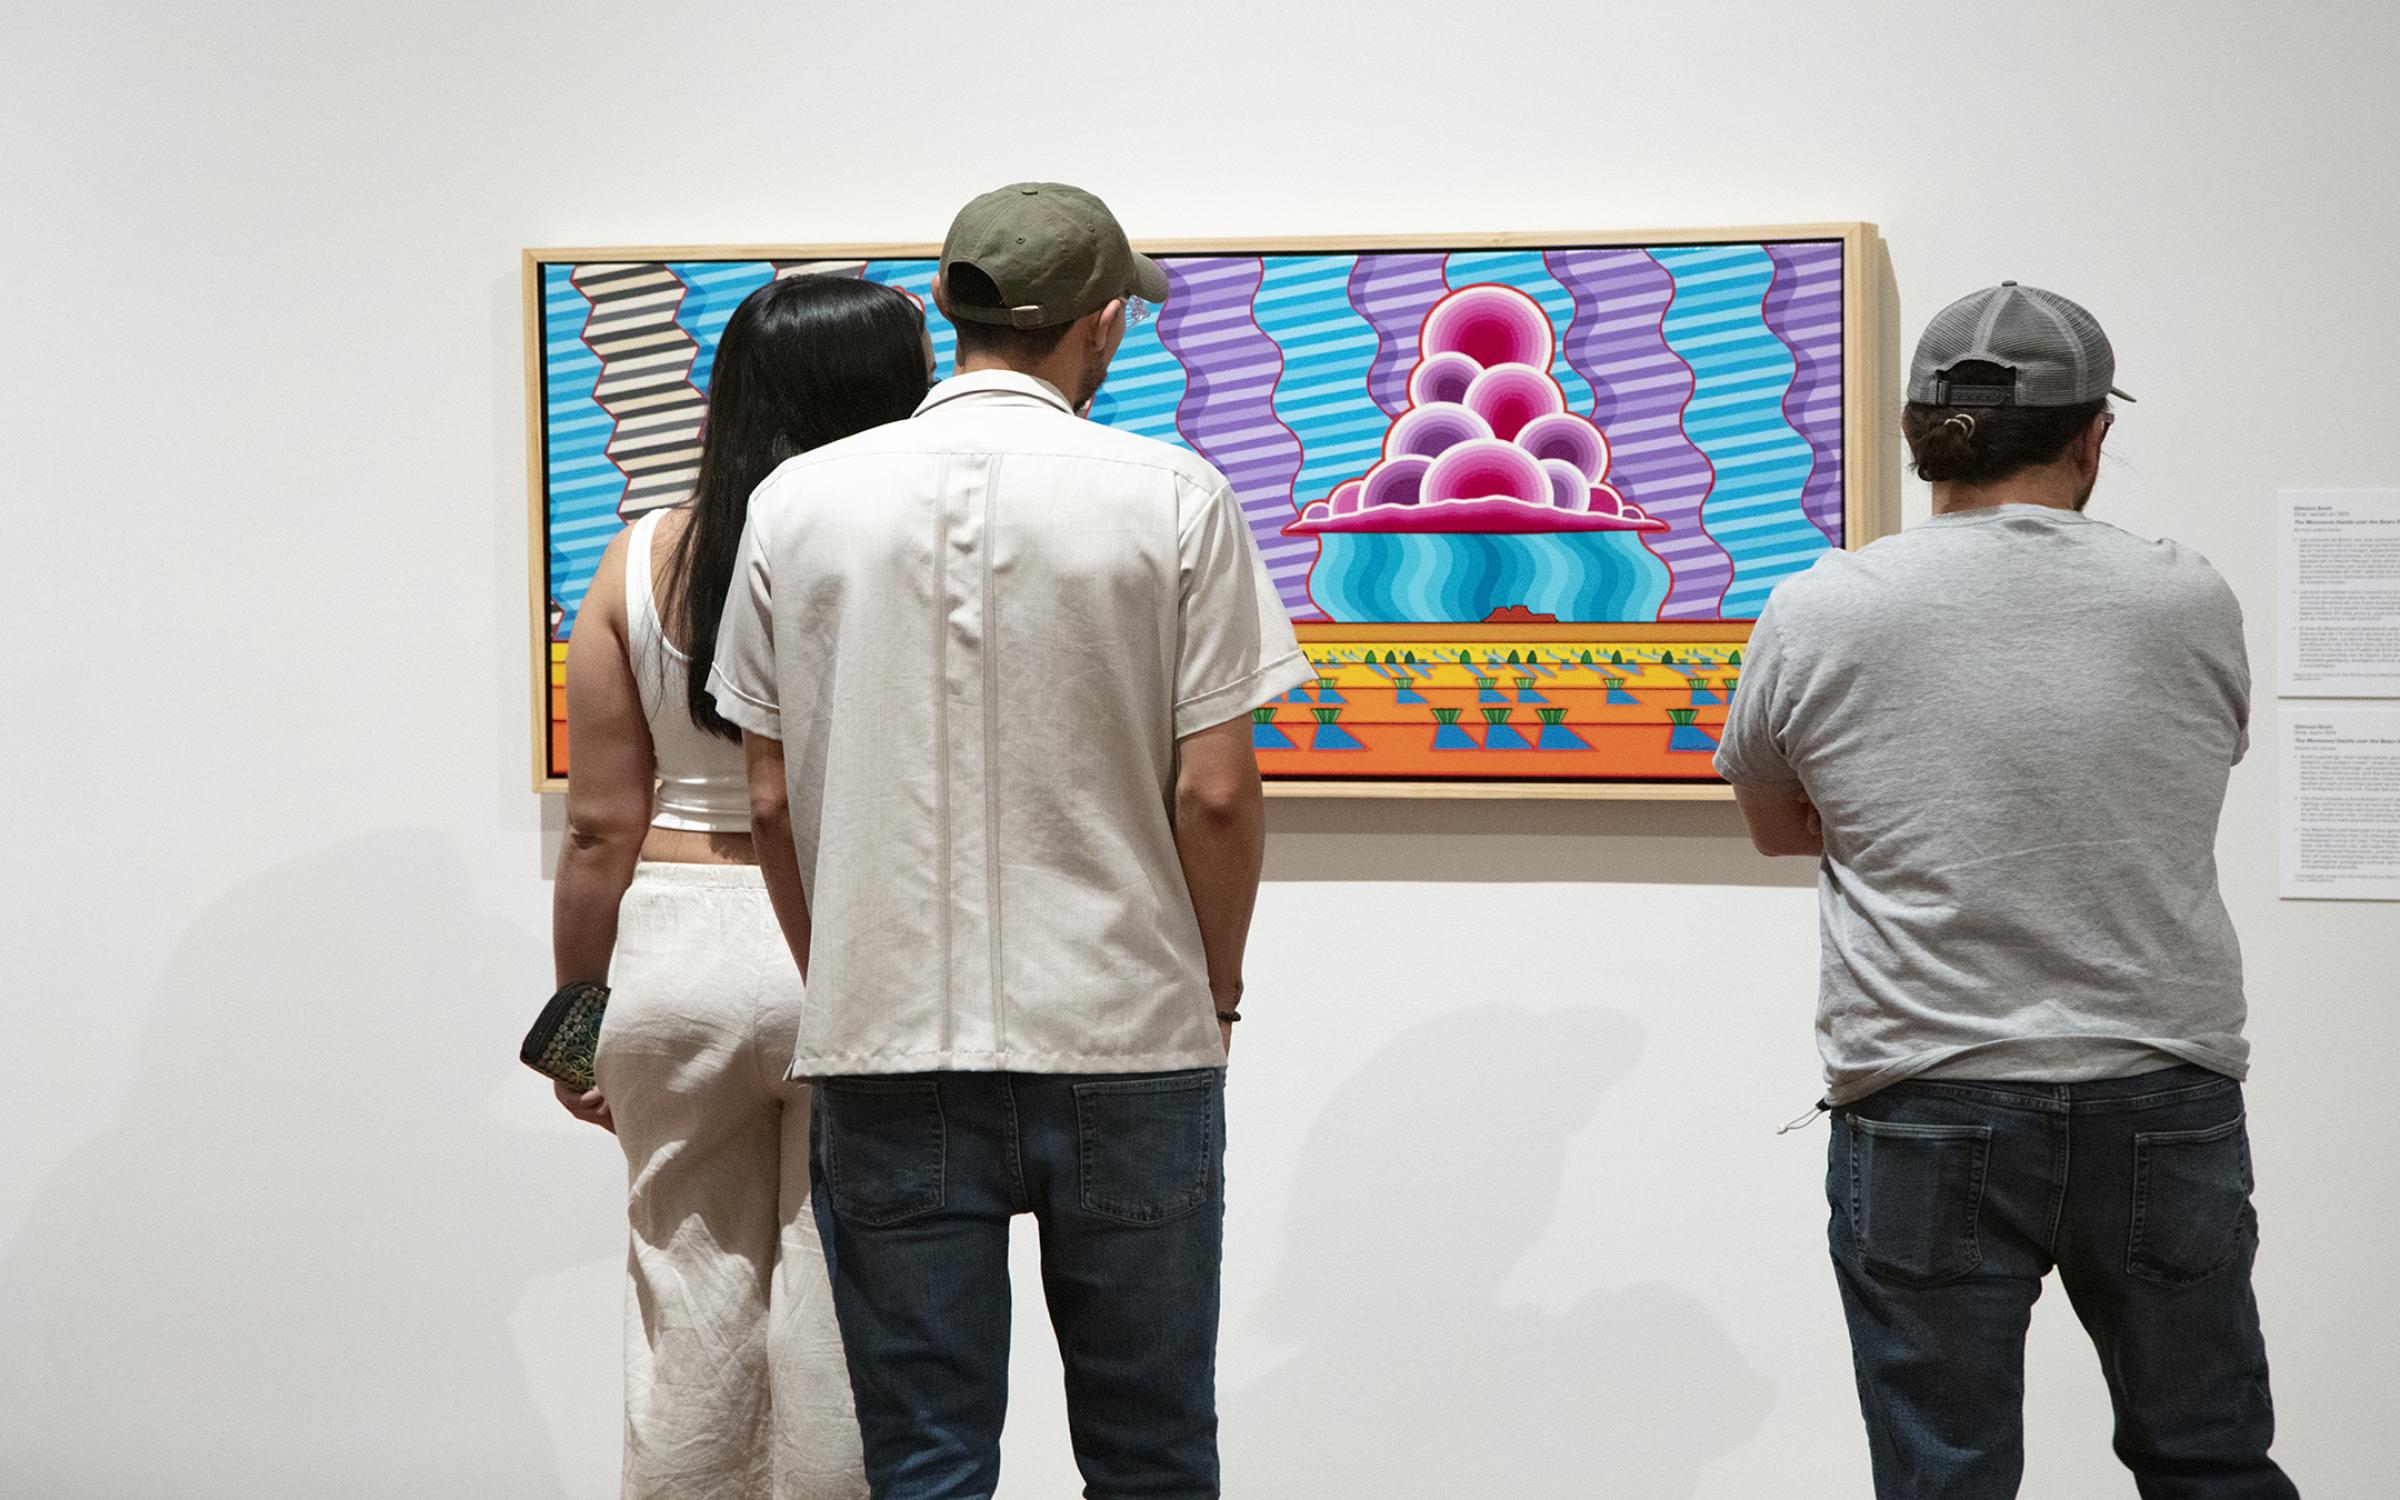 Three people with dark hair, stand with their backs to the camera, looking at bright, colorful artwork on a white wall.